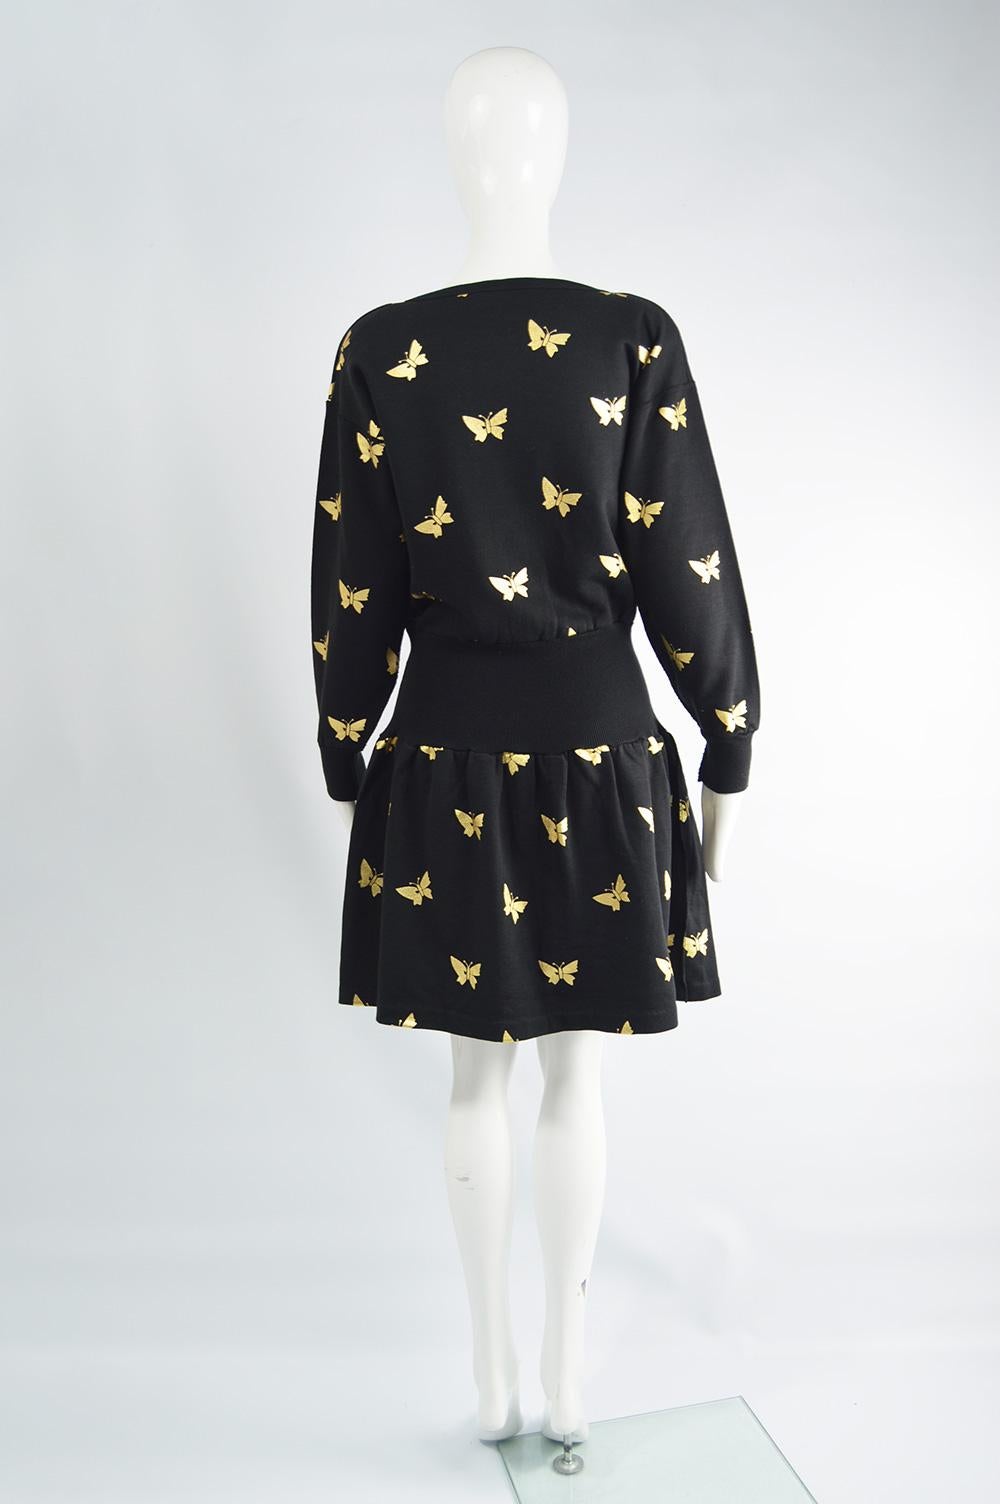 Sonia Rykiel Vintage Gold Butterfly Print Flared Skirt Sweatshirt Dress, 1980s In Excellent Condition For Sale In Doncaster, South Yorkshire